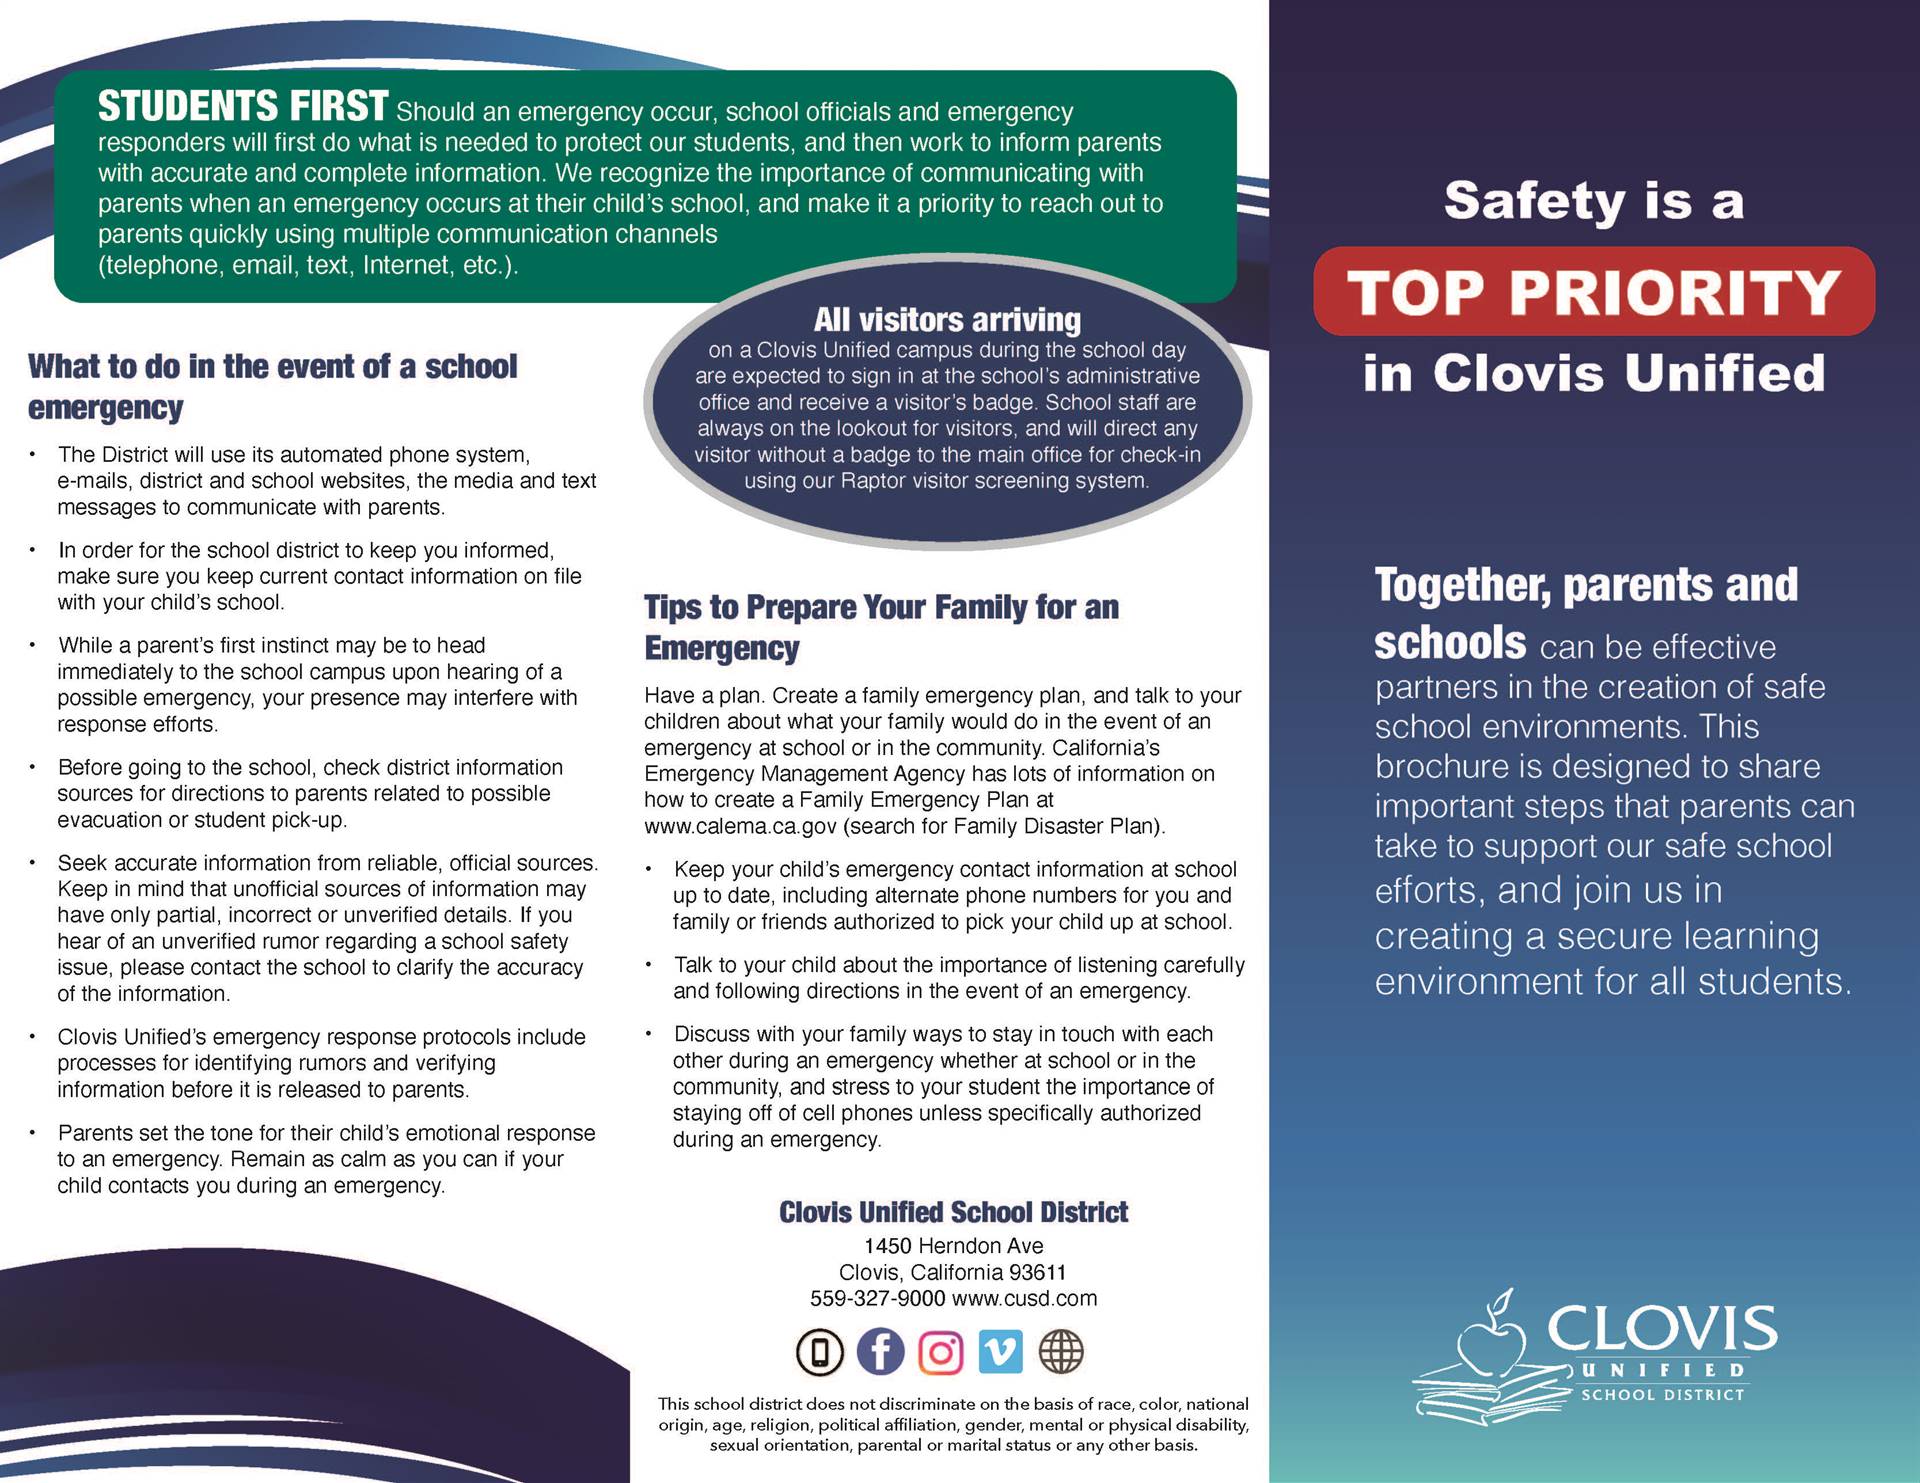 CUSD Safety Brochure - Full text downloadable at right